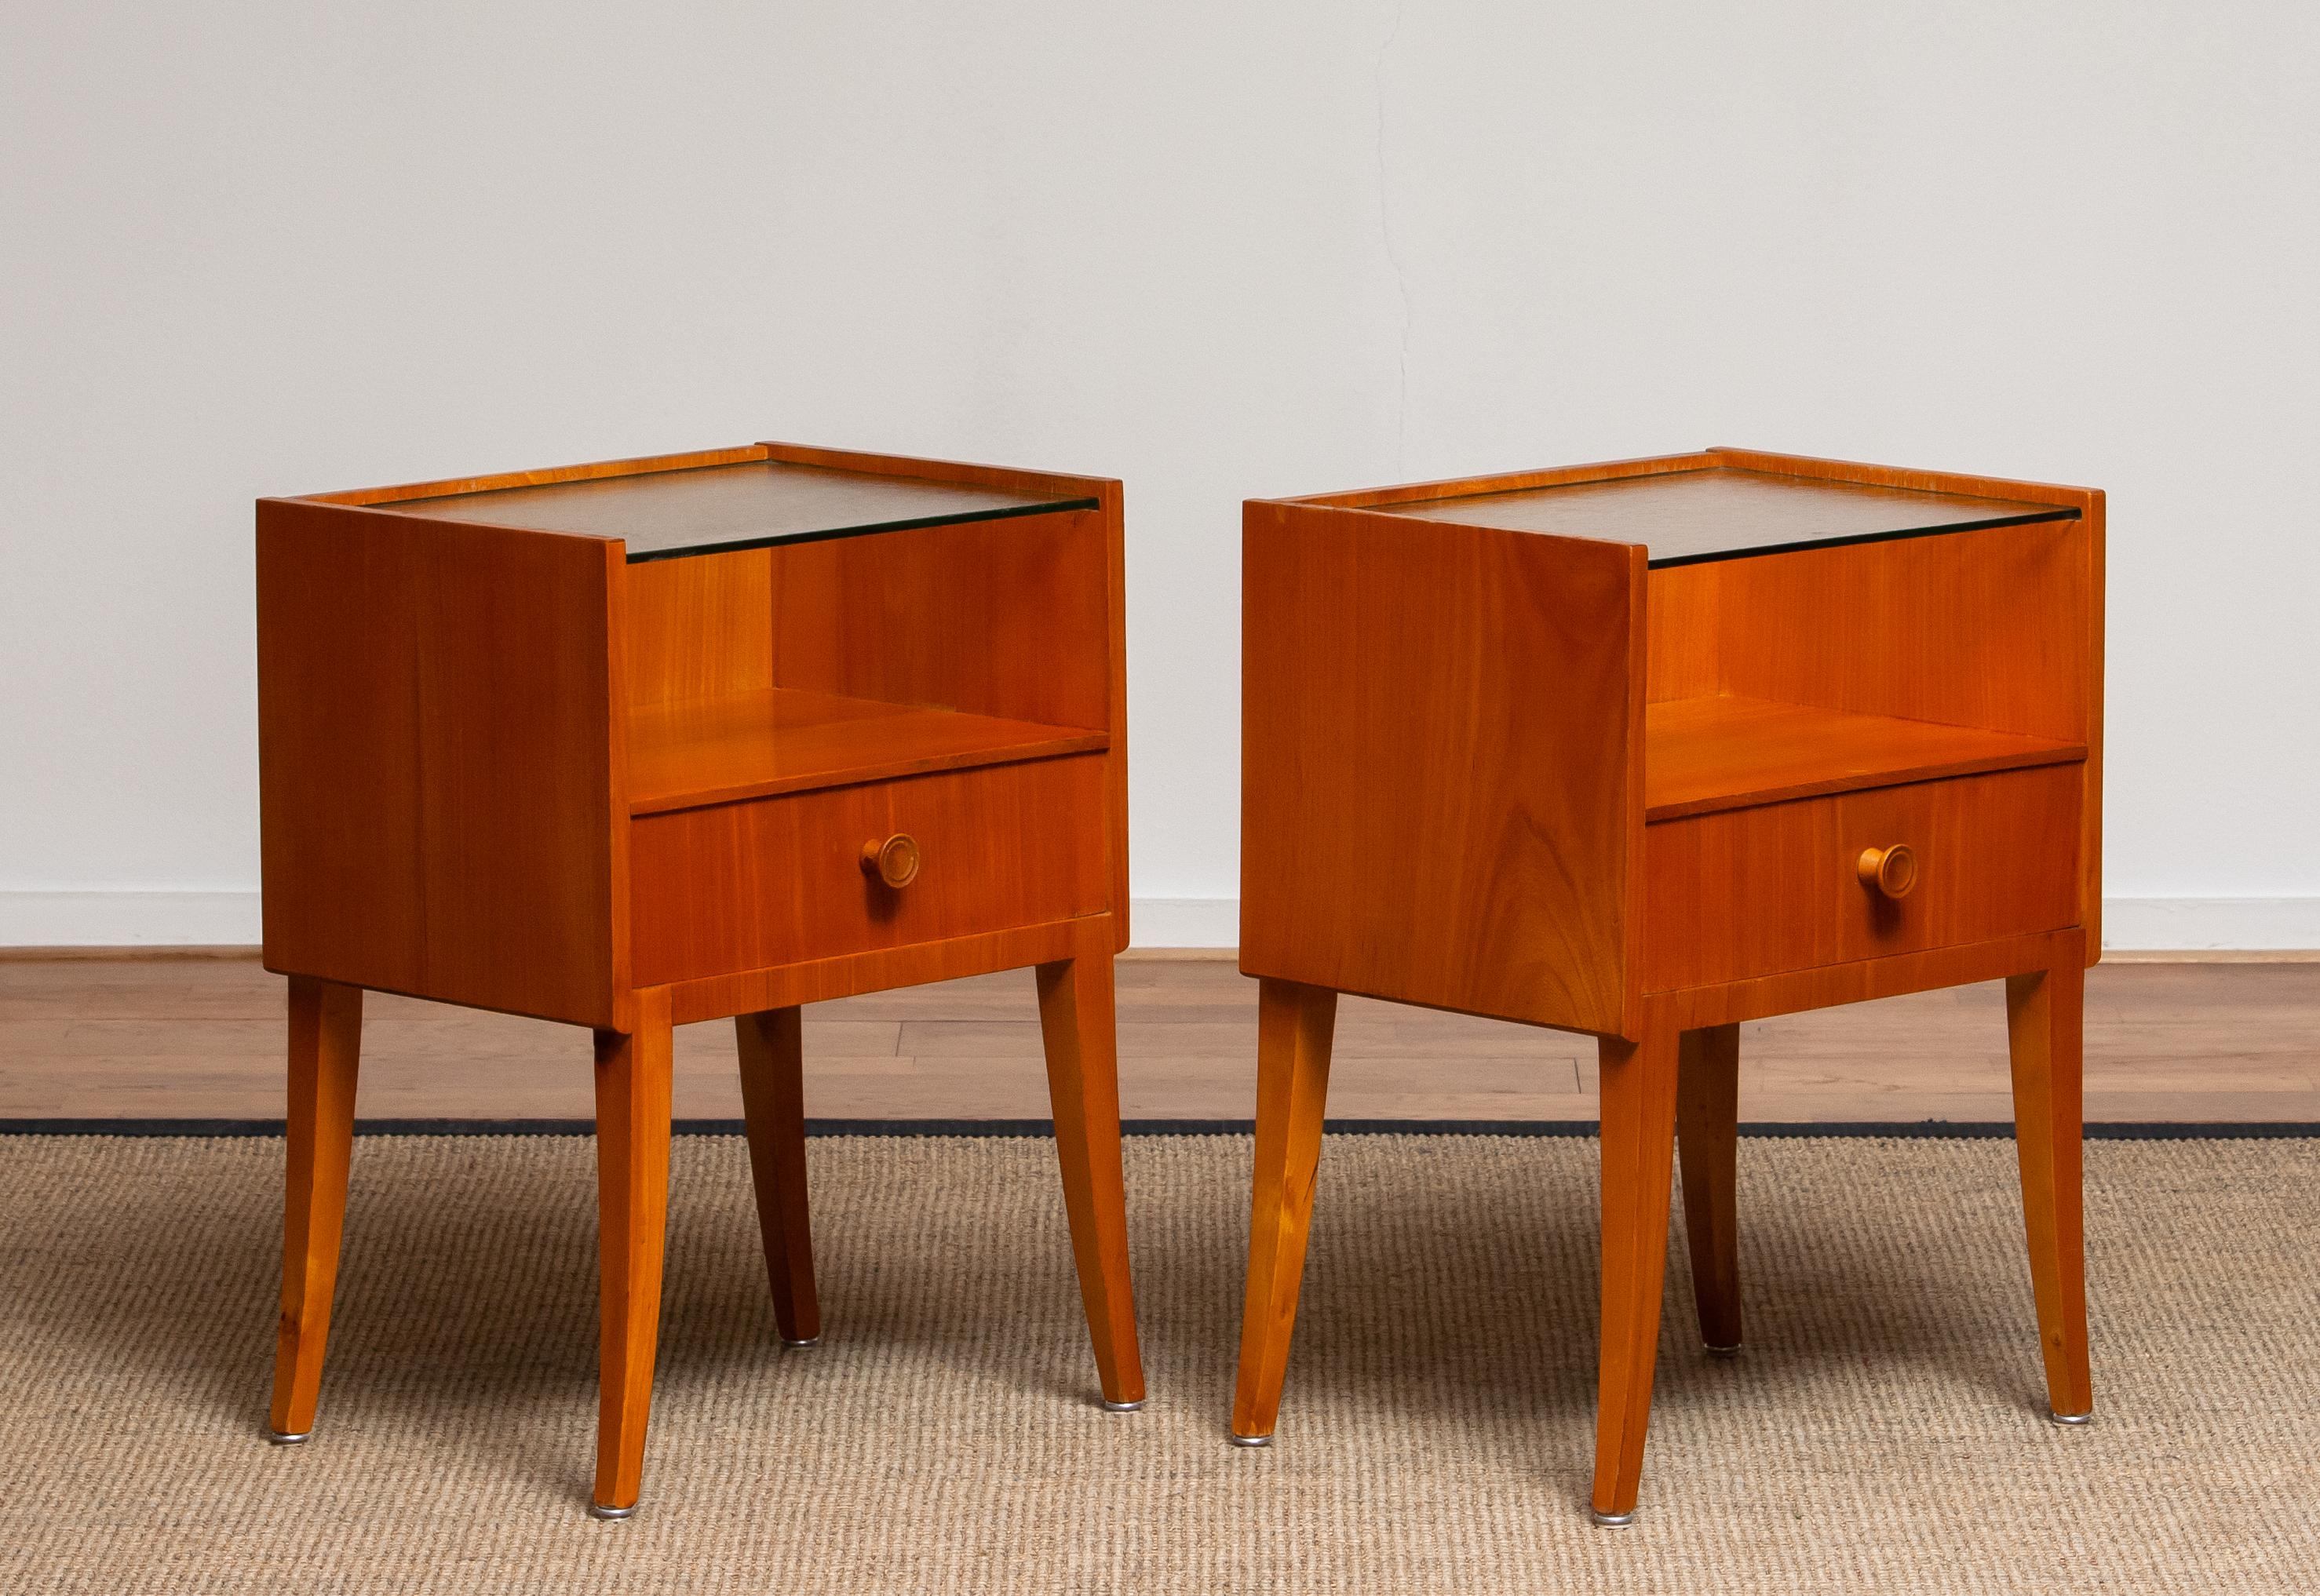 Very elegant set of two Scandinavian nightstands or bedside tables made in elm with a glass toping from Sweden.
The nightstands or bedside tables are overall in good condition.